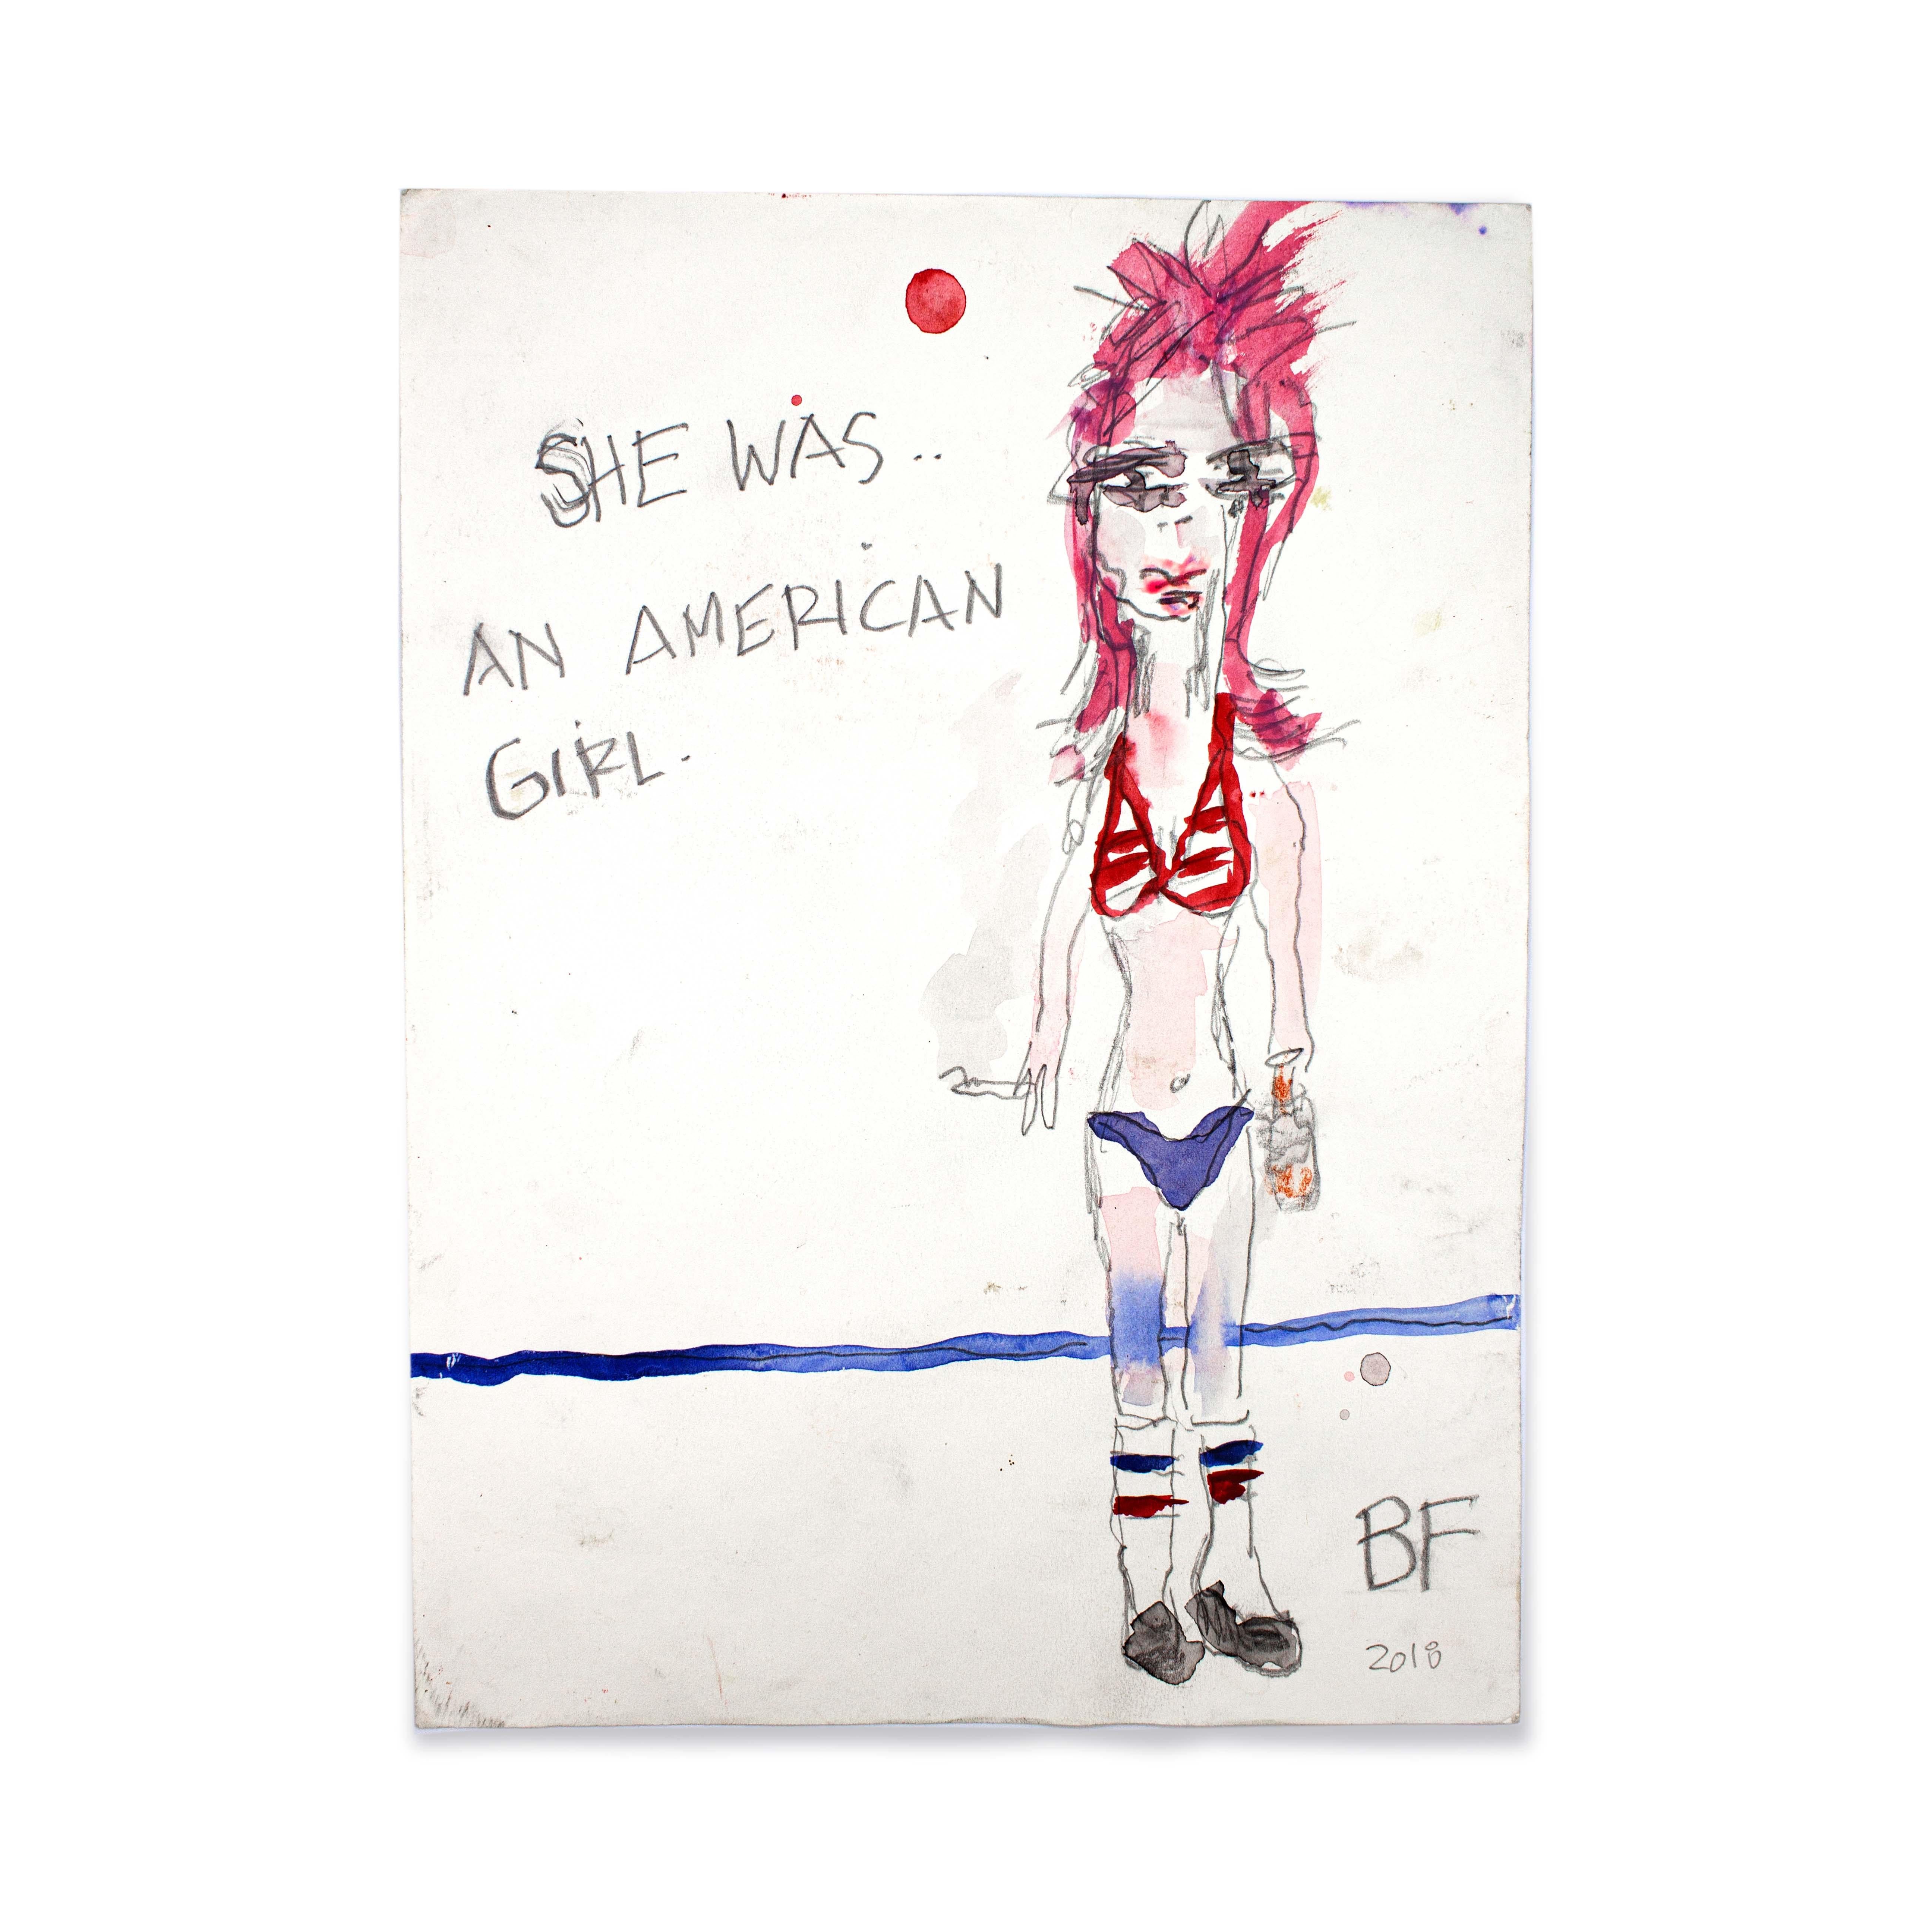 American Girl, 2018

Graphite, Ink, and Japanese watercolor on paper by artist Brad Fisher. Unframed.

12 × 9 in

Shipping is not included. See our shipping policies. Please contact us for shipping quotes and customization options. 
 
All sales are